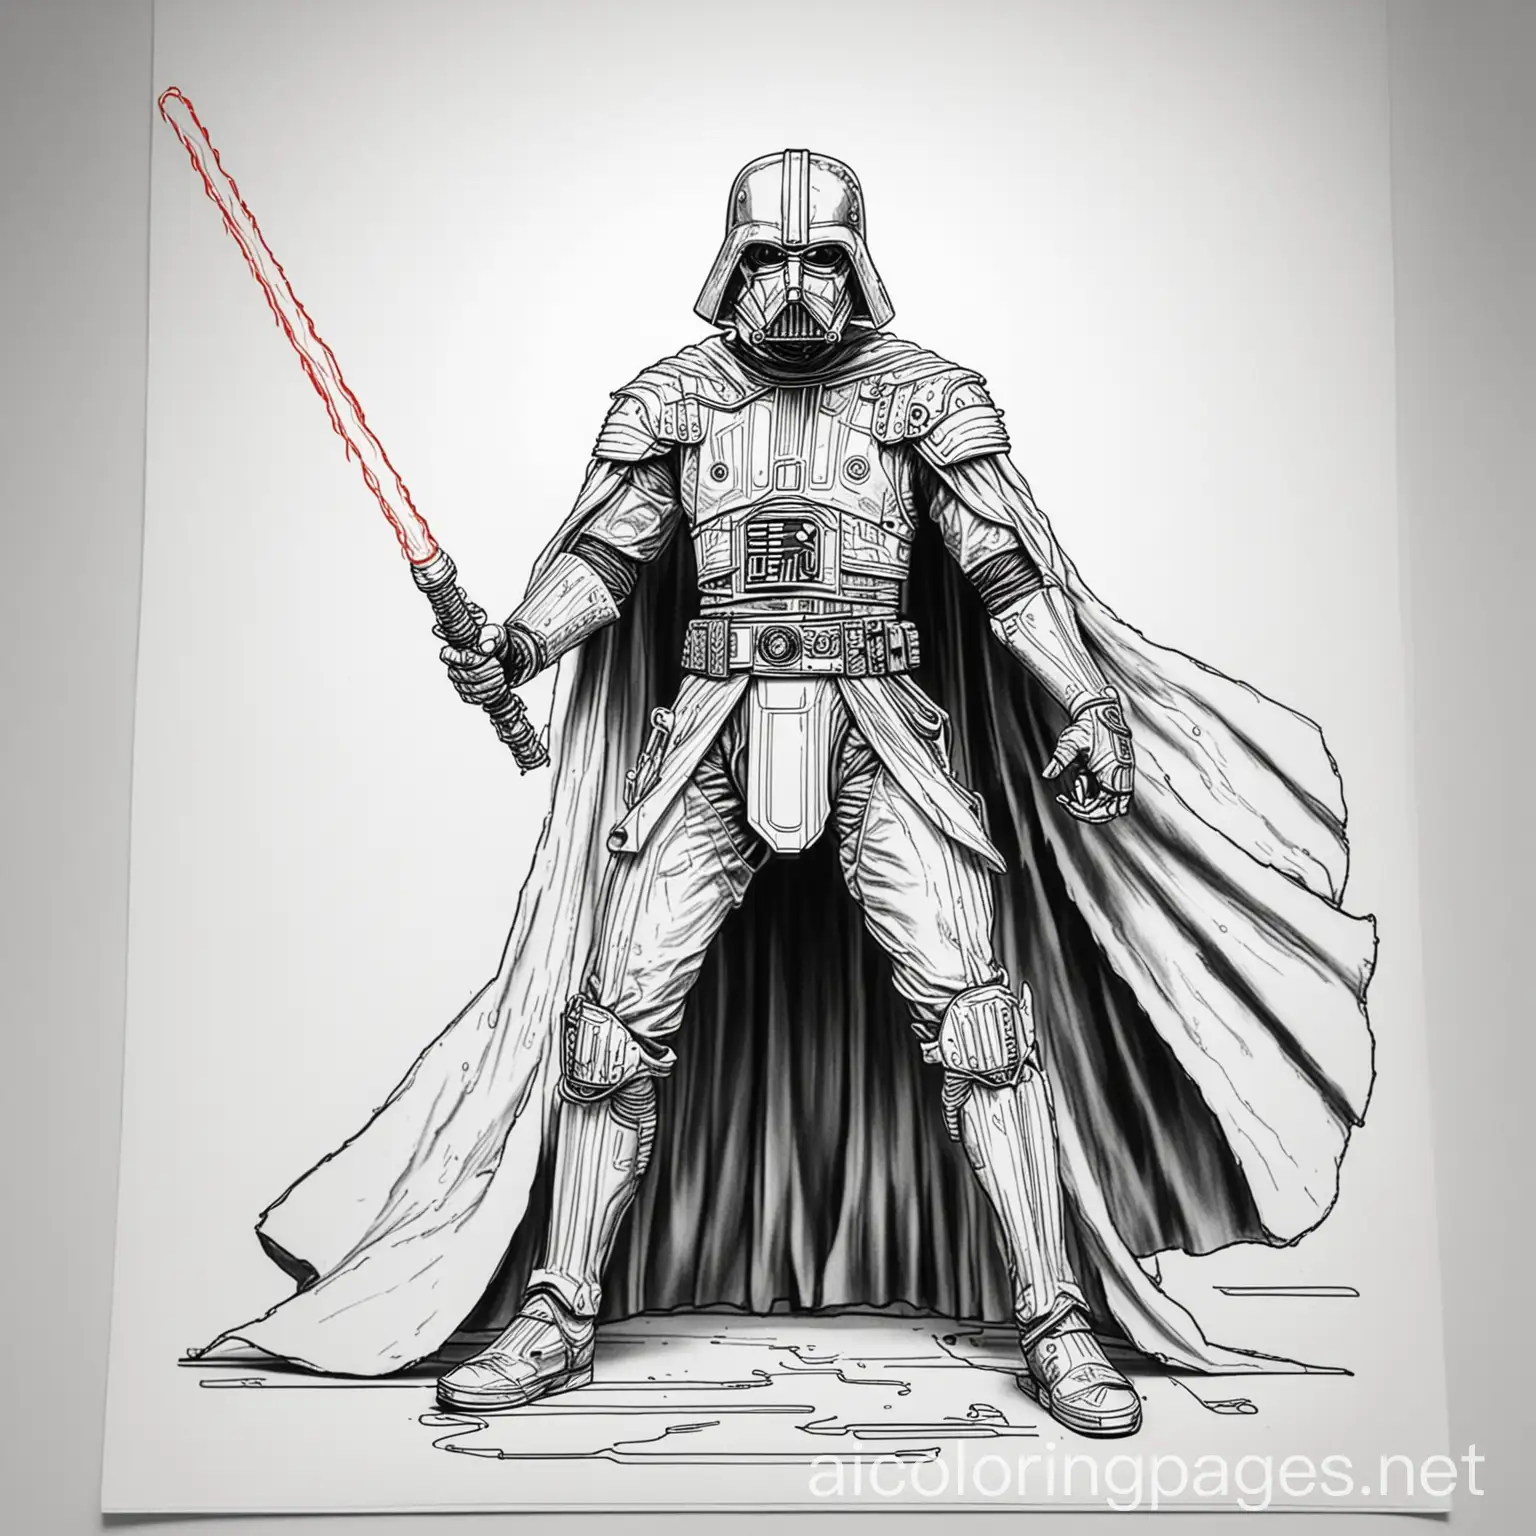 star wars emperor using lightsaber and electricity power, Coloring Page, black and white, line art, white background, Simplicity, Ample White Space. The background of the coloring page is plain white to make it easy for young children to color within the lines. The outlines of all the subjects are easy to distinguish, making it simple for kids to color without too much difficulty